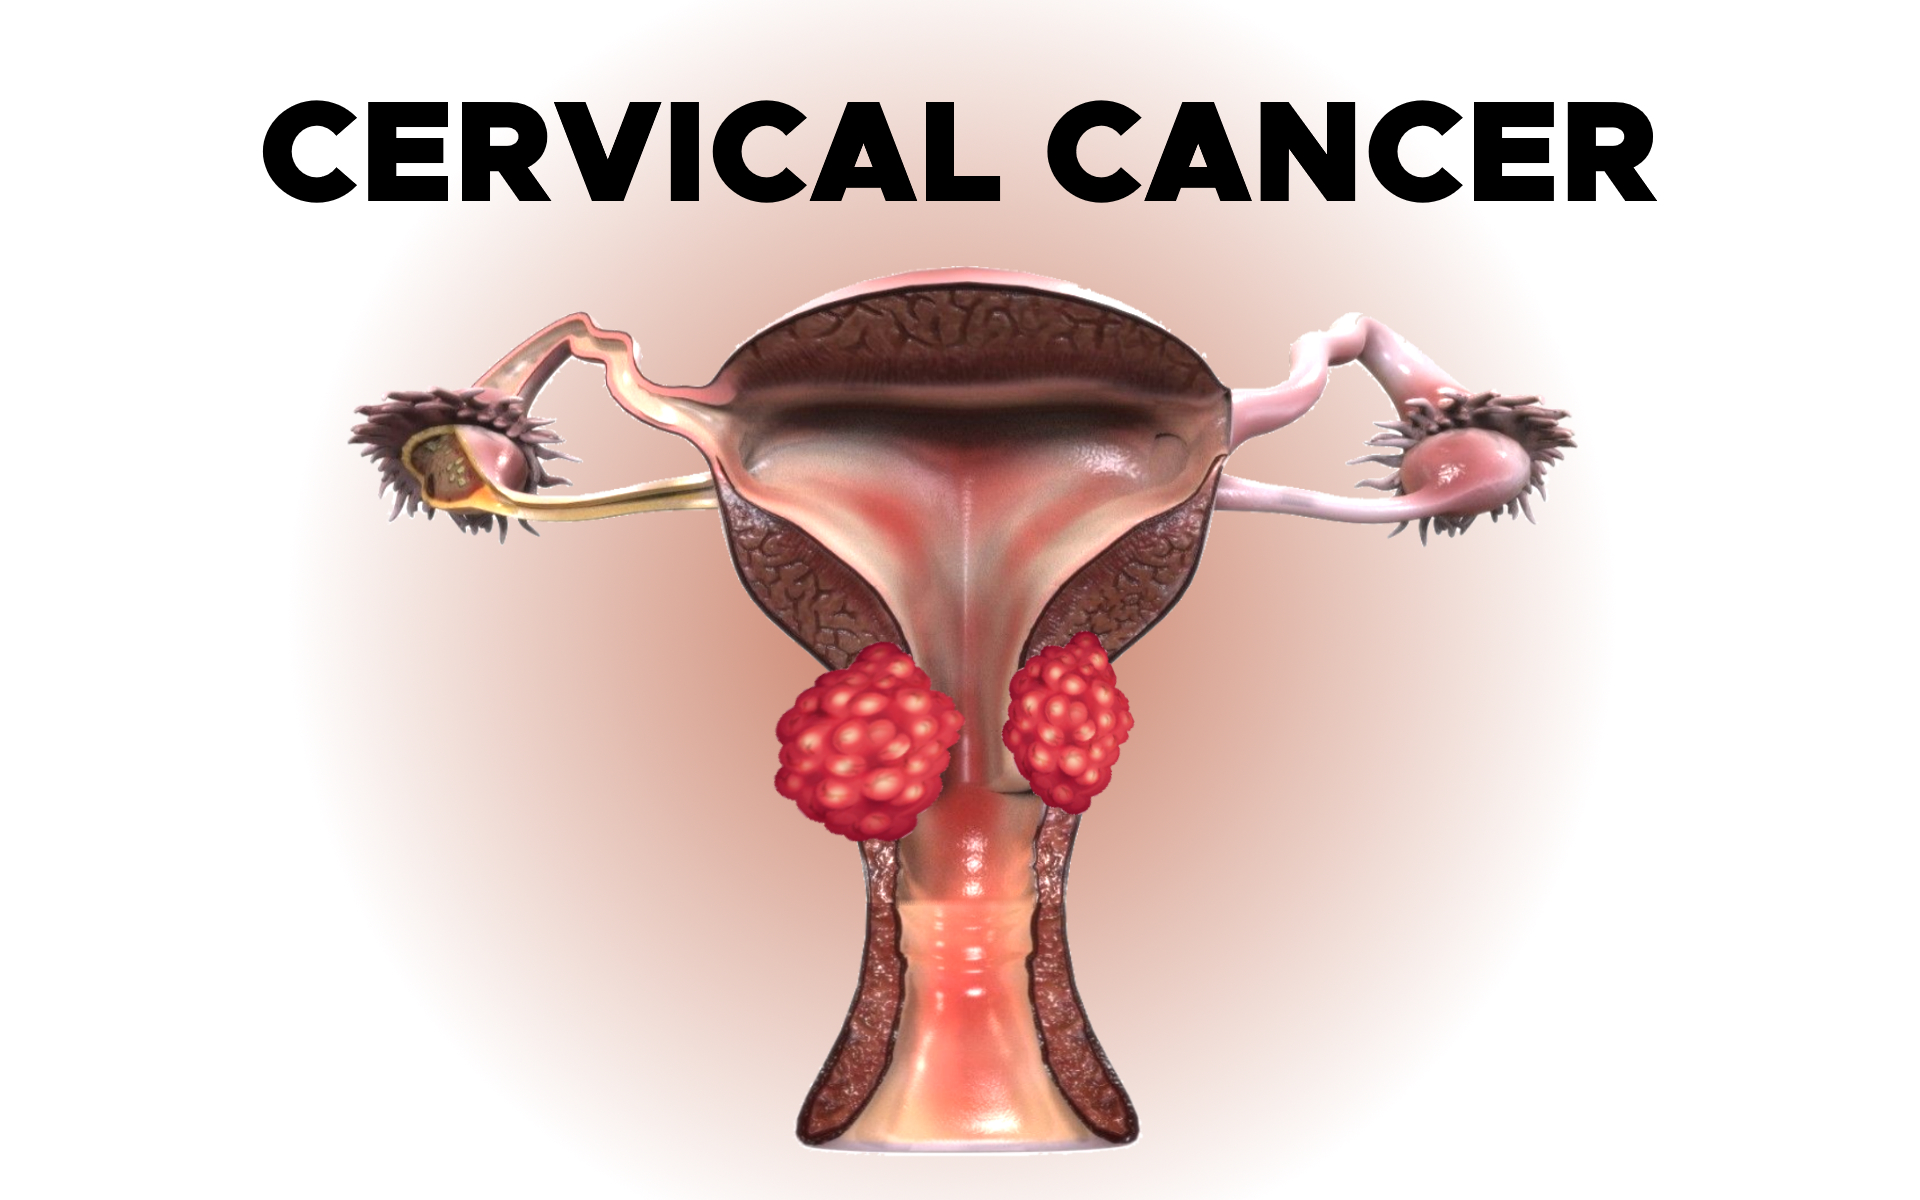 Can a 25 year old get cervical cancer? Can a 22 year old get cervical cancer?